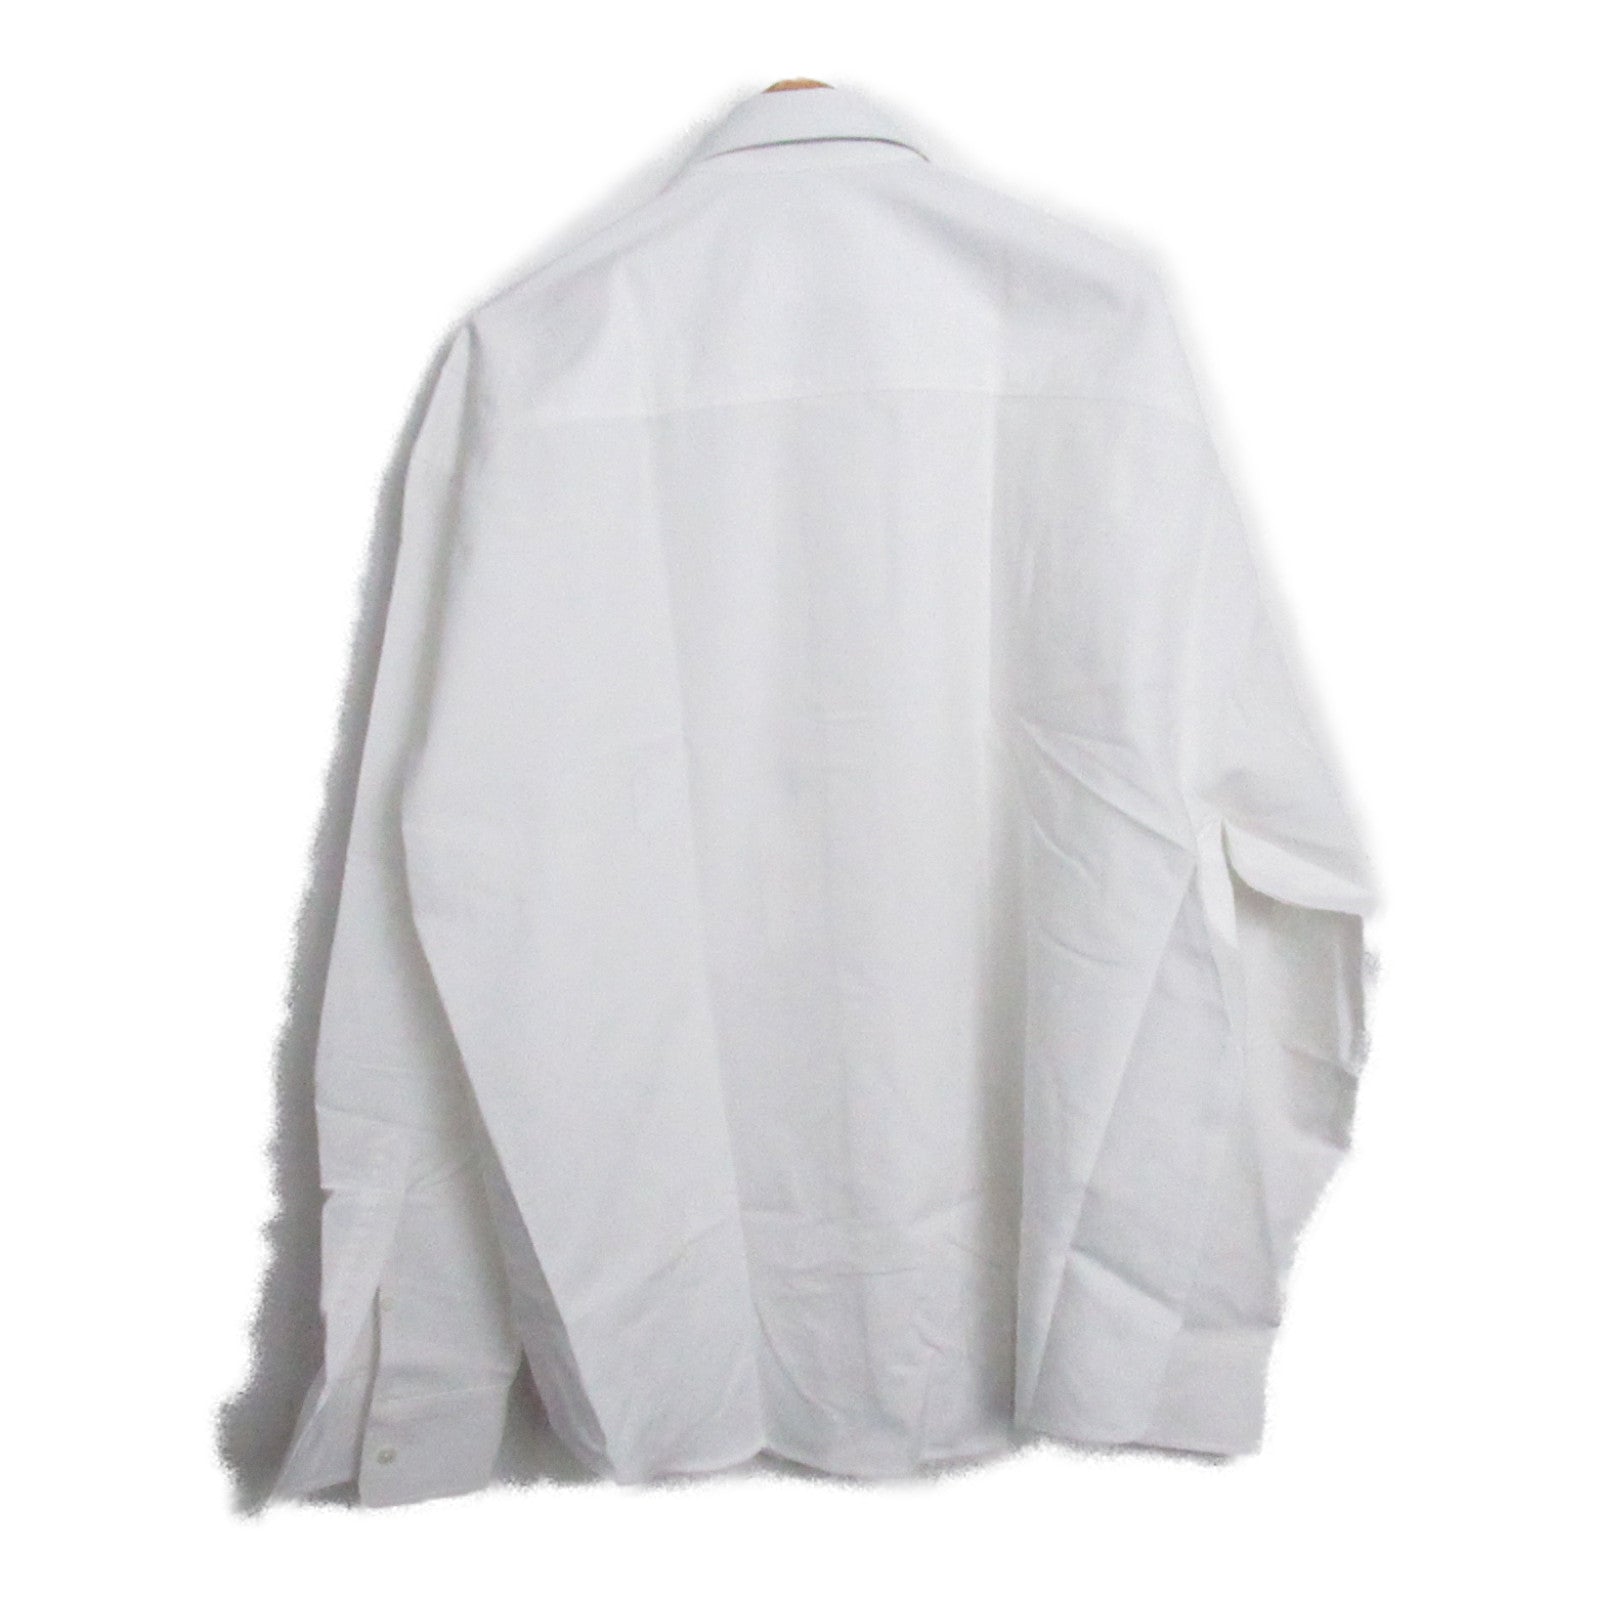 AMI AMI Boxing Fit  Long-Handed   Tops Cotton  White BFUSH130.CO0031168M